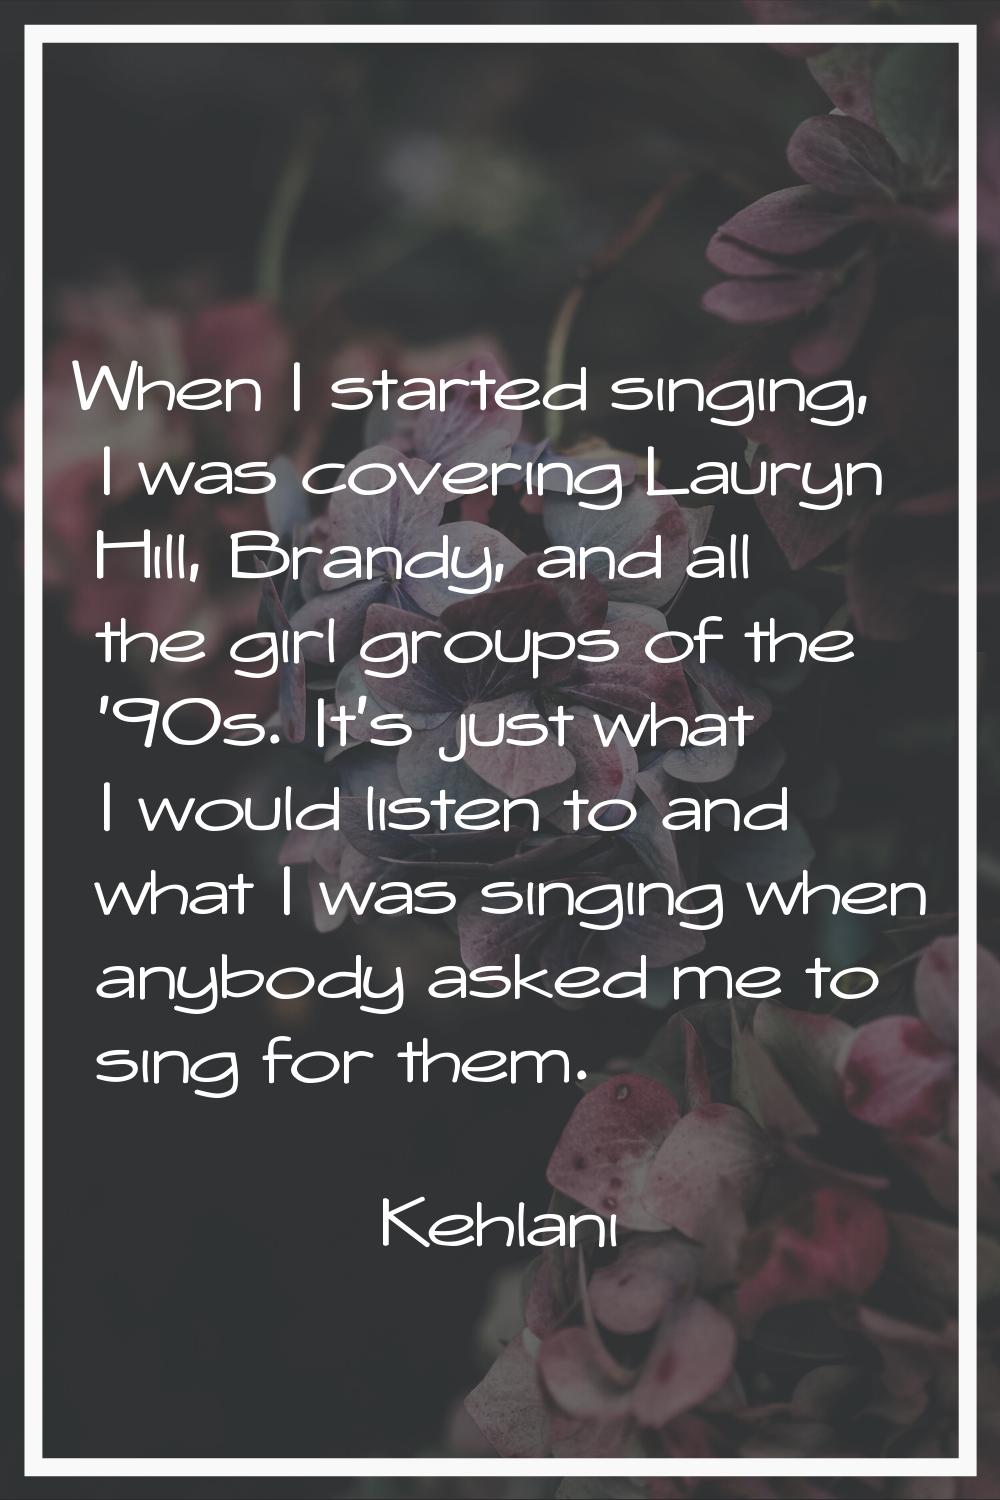 When I started singing, I was covering Lauryn Hill, Brandy, and all the girl groups of the '90s. It